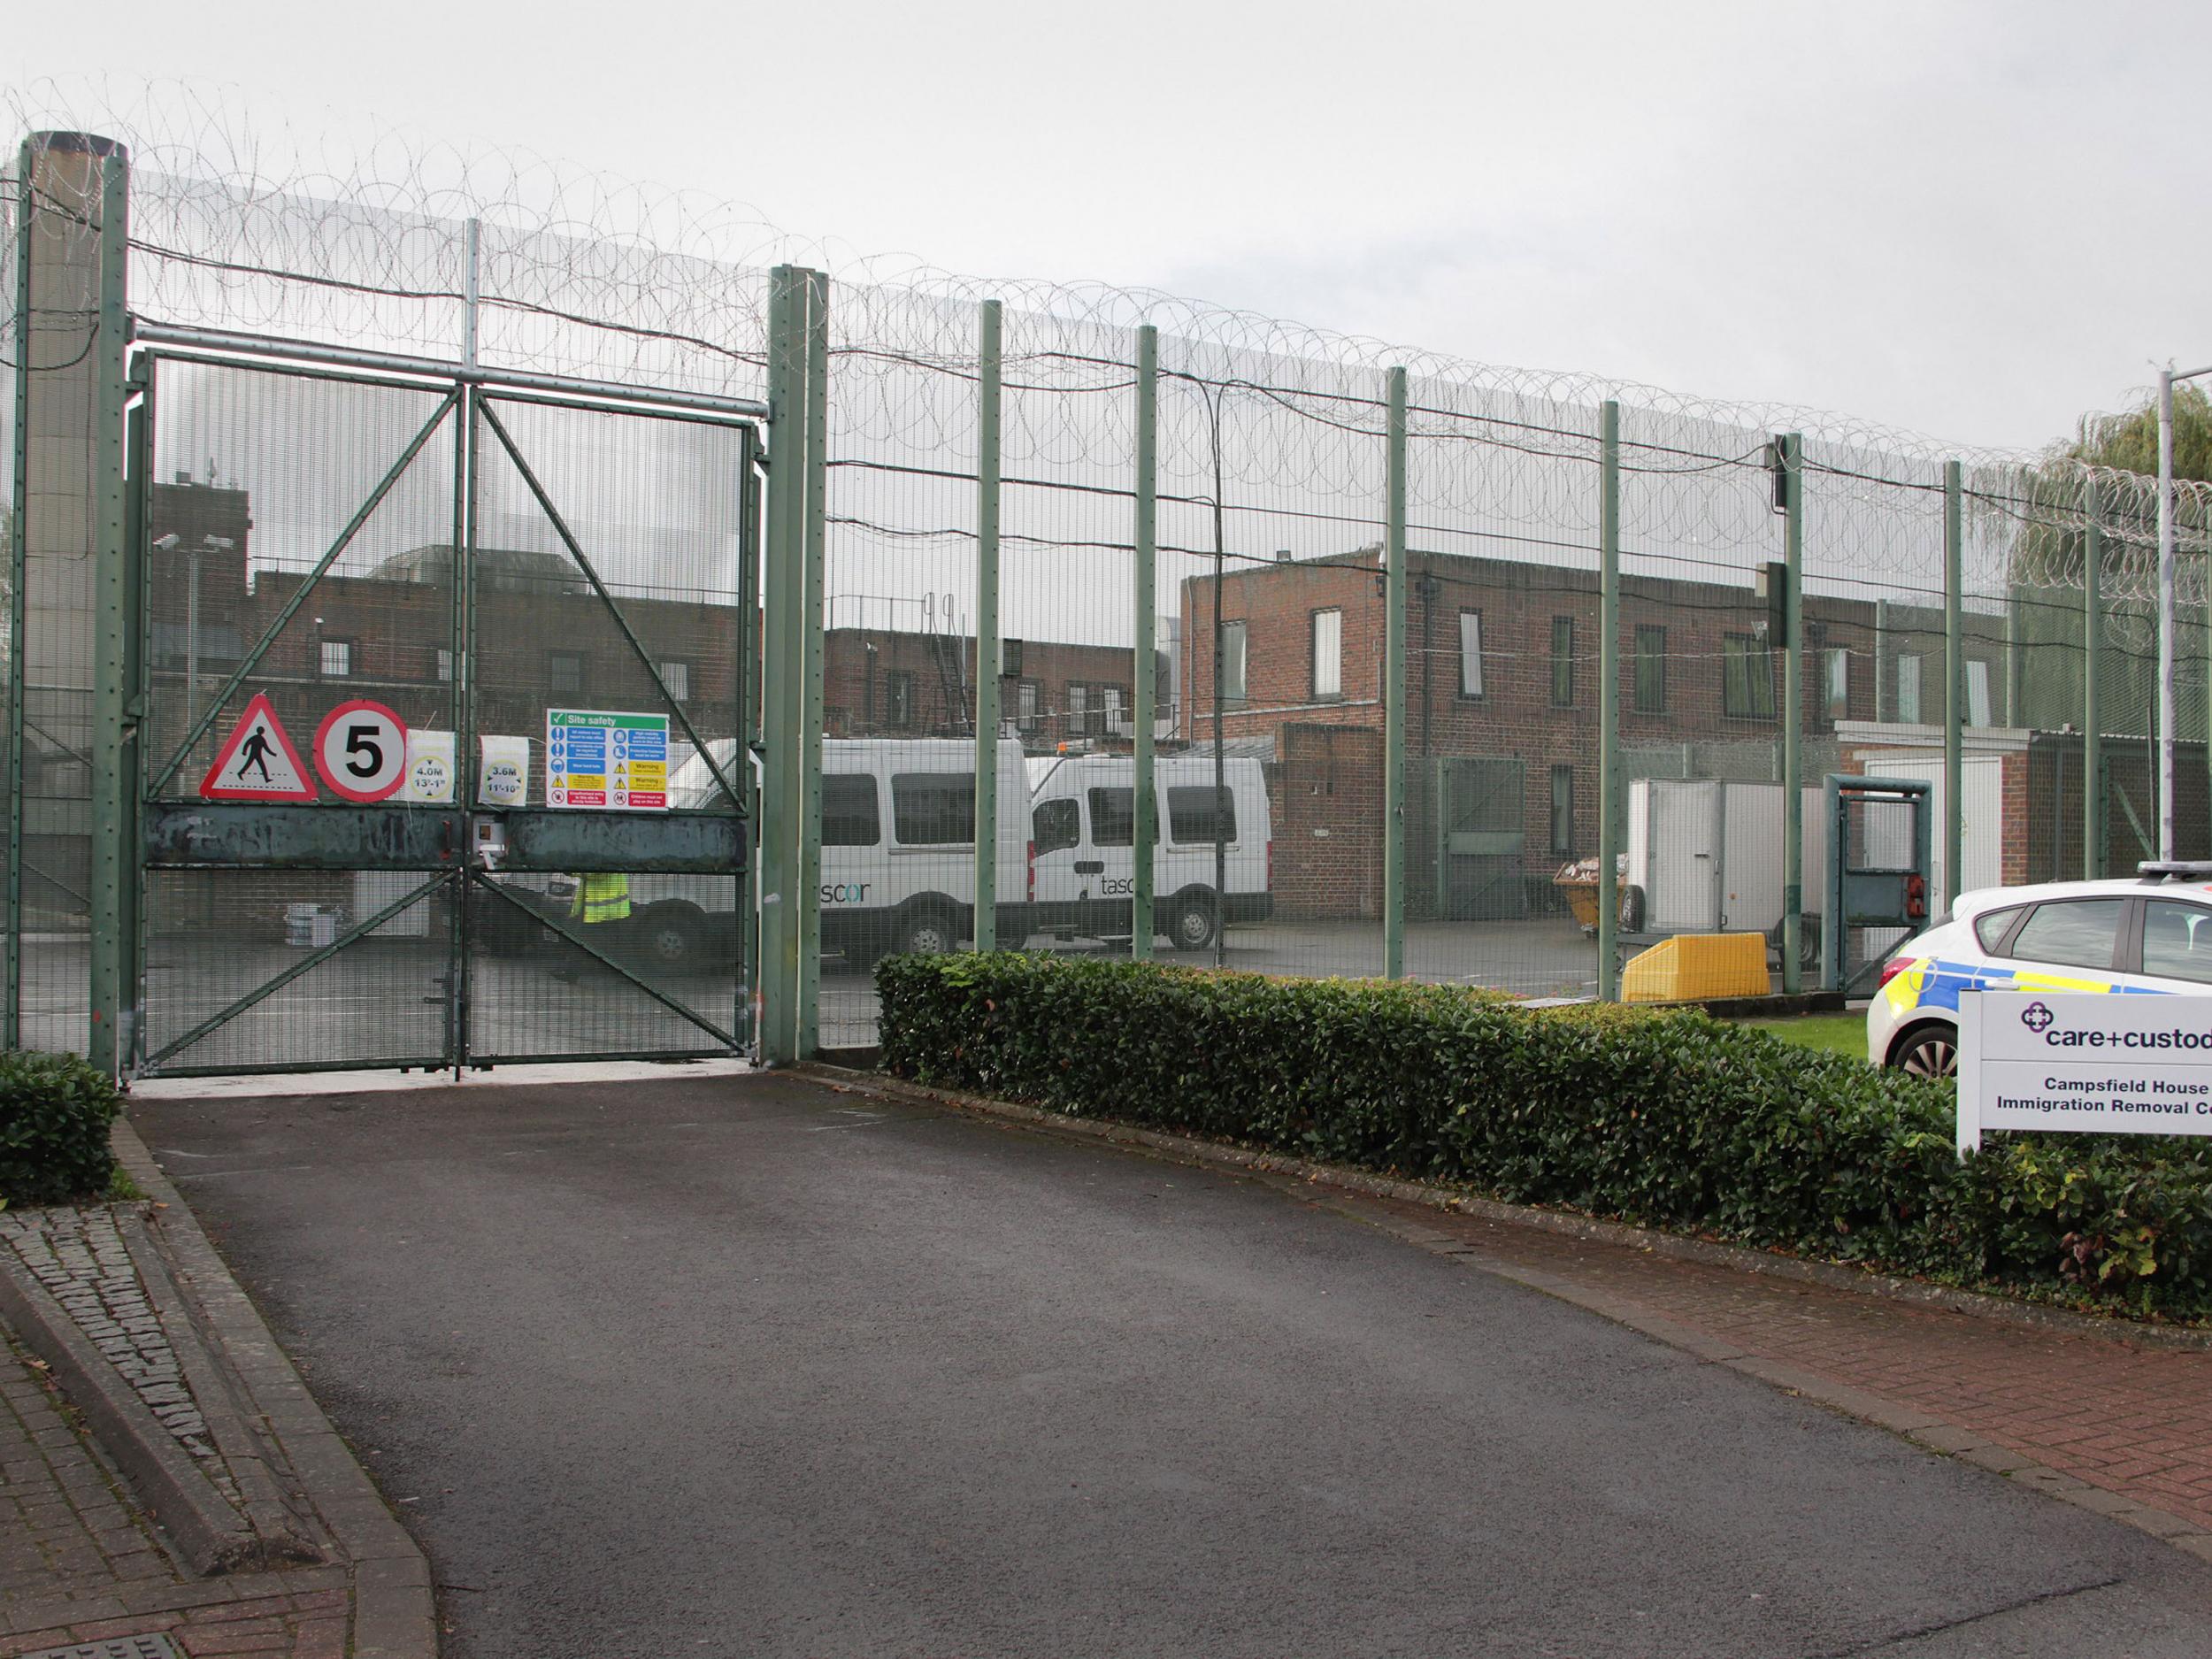 Campsfield closed in 2018 after years of being the subject of fierce criticism over concerns about the length of time people were being locked up